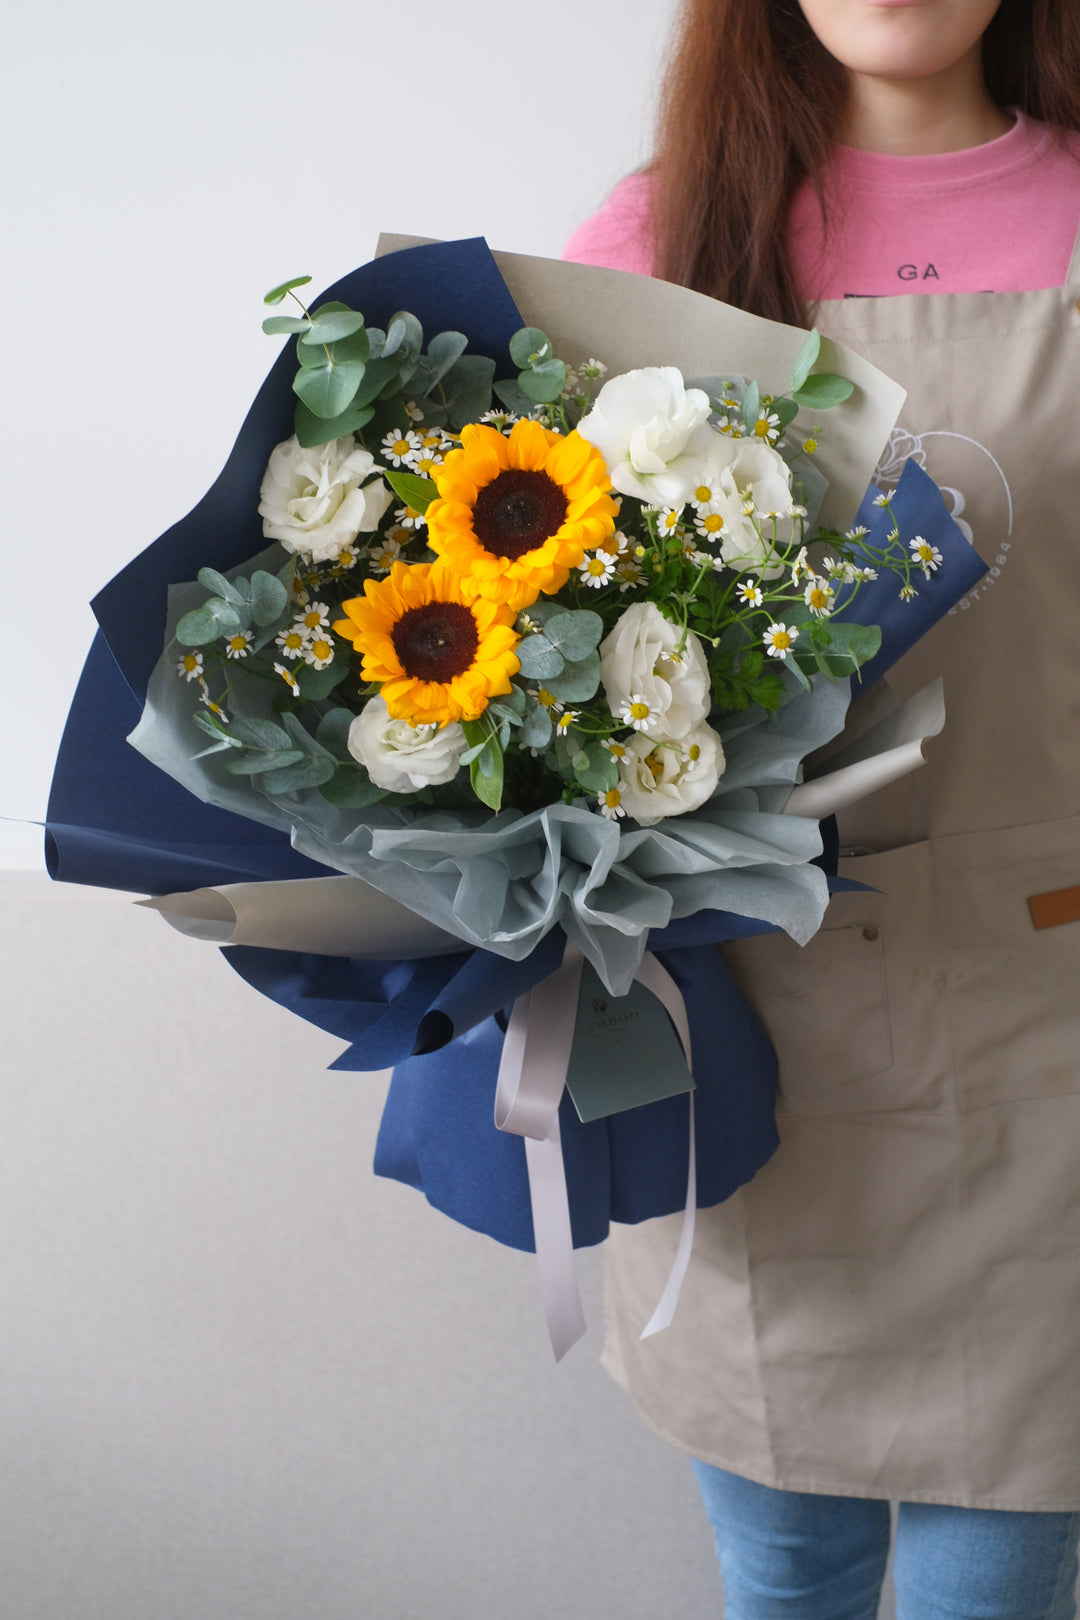 An arrangement that radiates pure happiness! Perfect for birthdays, expressing gratitude, or simply brightening someone's day. This bouquet features cheerful sunflowers, elegant white eustoma, charming chamomiles, and fragrant eucalyptus, all beautifully arranged in a navy and grey wrap